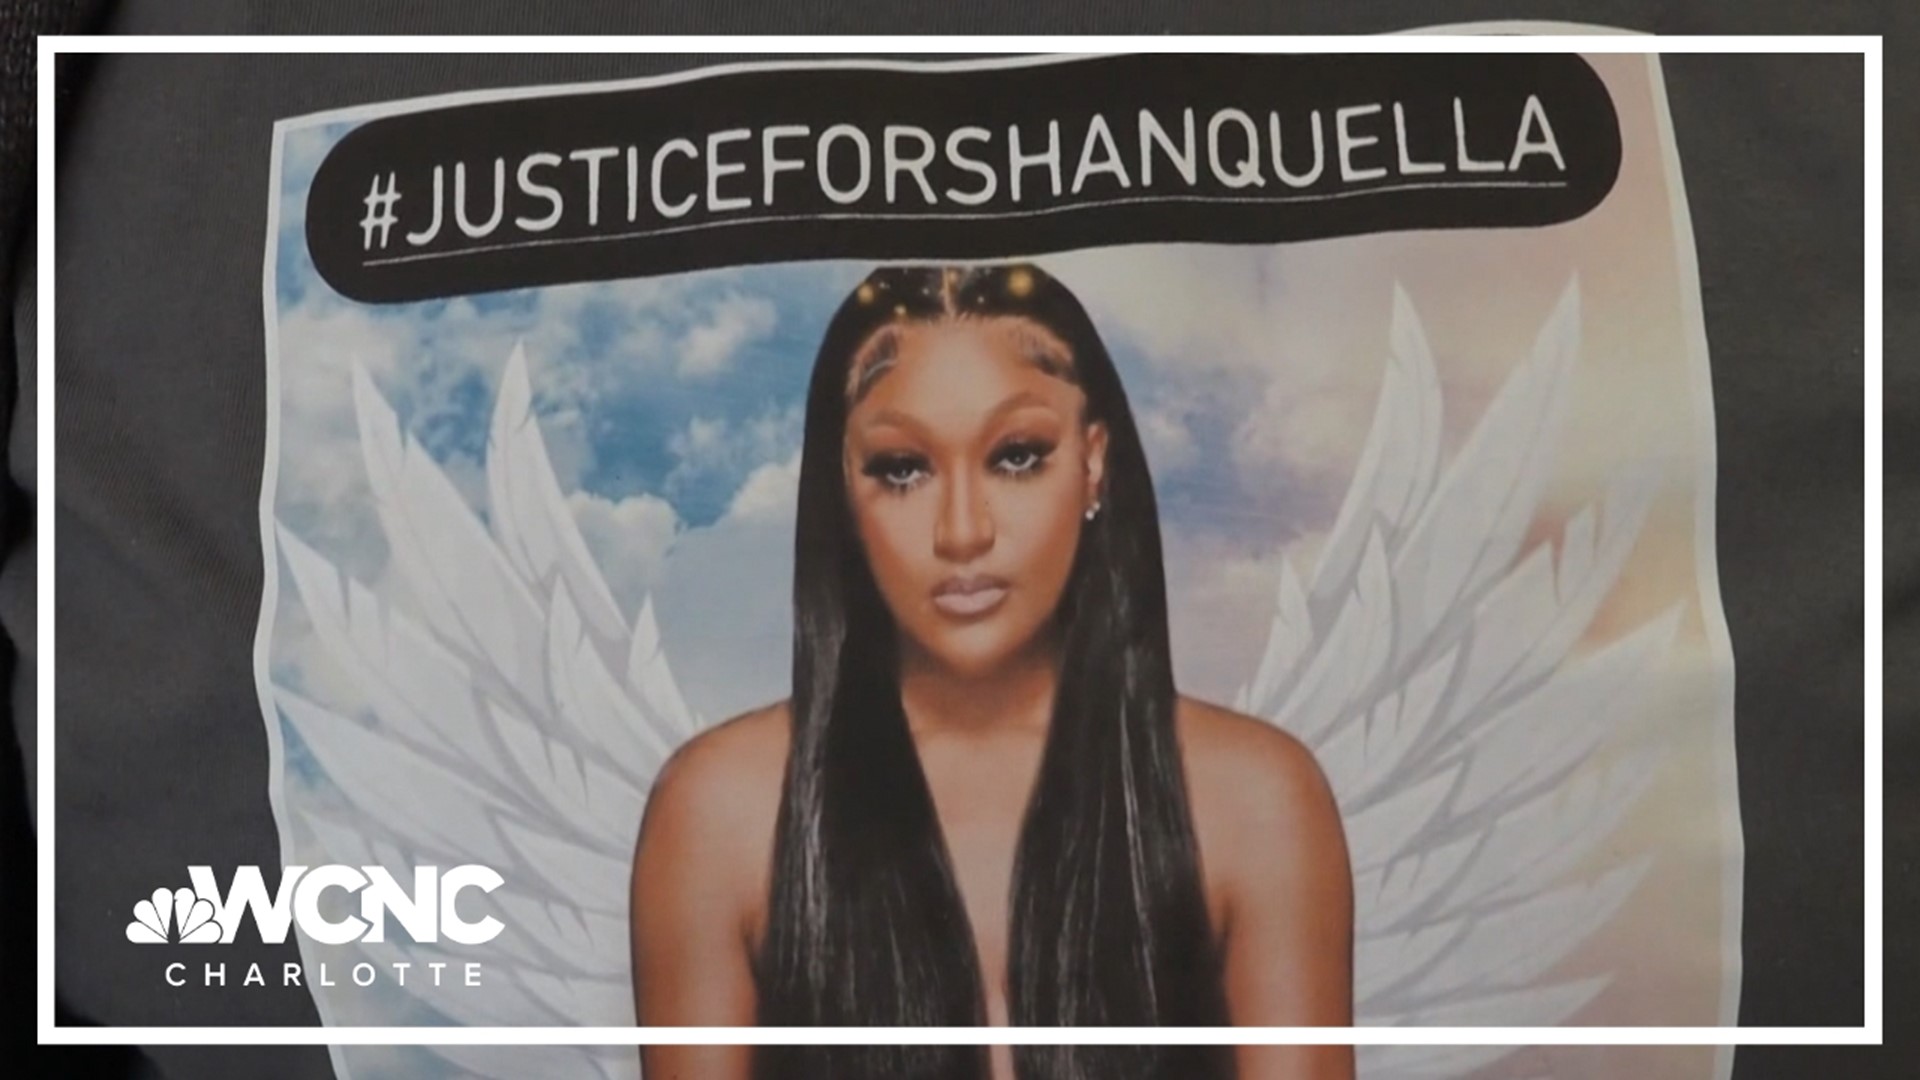 Family members are still seeking justice in the death of Shanquella Robinson a year after she was killed by people she traveled with to Mexico.